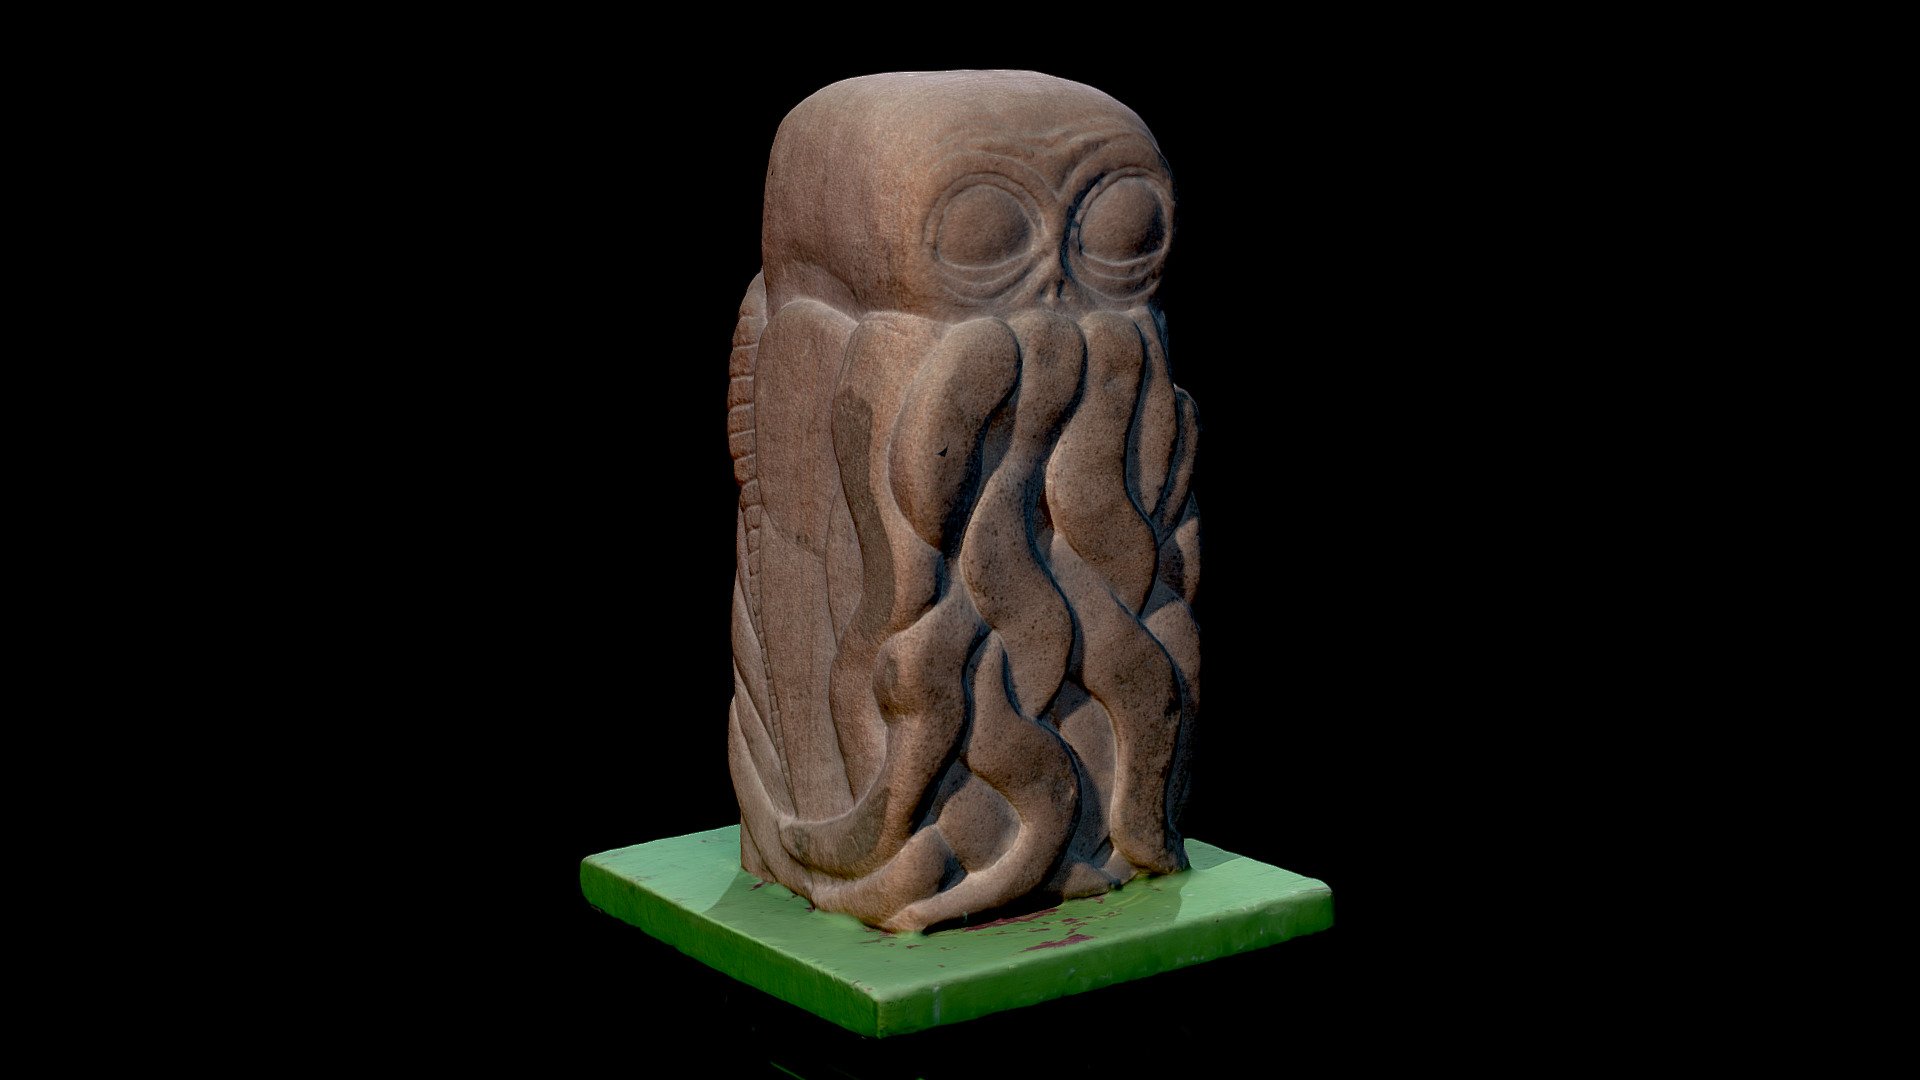 Stone bas-relief sculpture inspired by ones mentioned in H. P. Lovecraft's  lauded tale ‘The Call of Cthulhu’.  Carved out of a block of Dumfrieshire red sandstone by the North England artist  J. M. Mylotte and sits on a green painted wooden pedestal. Photogrammetric rendering was processed in AutoDesk's Remake 3d model